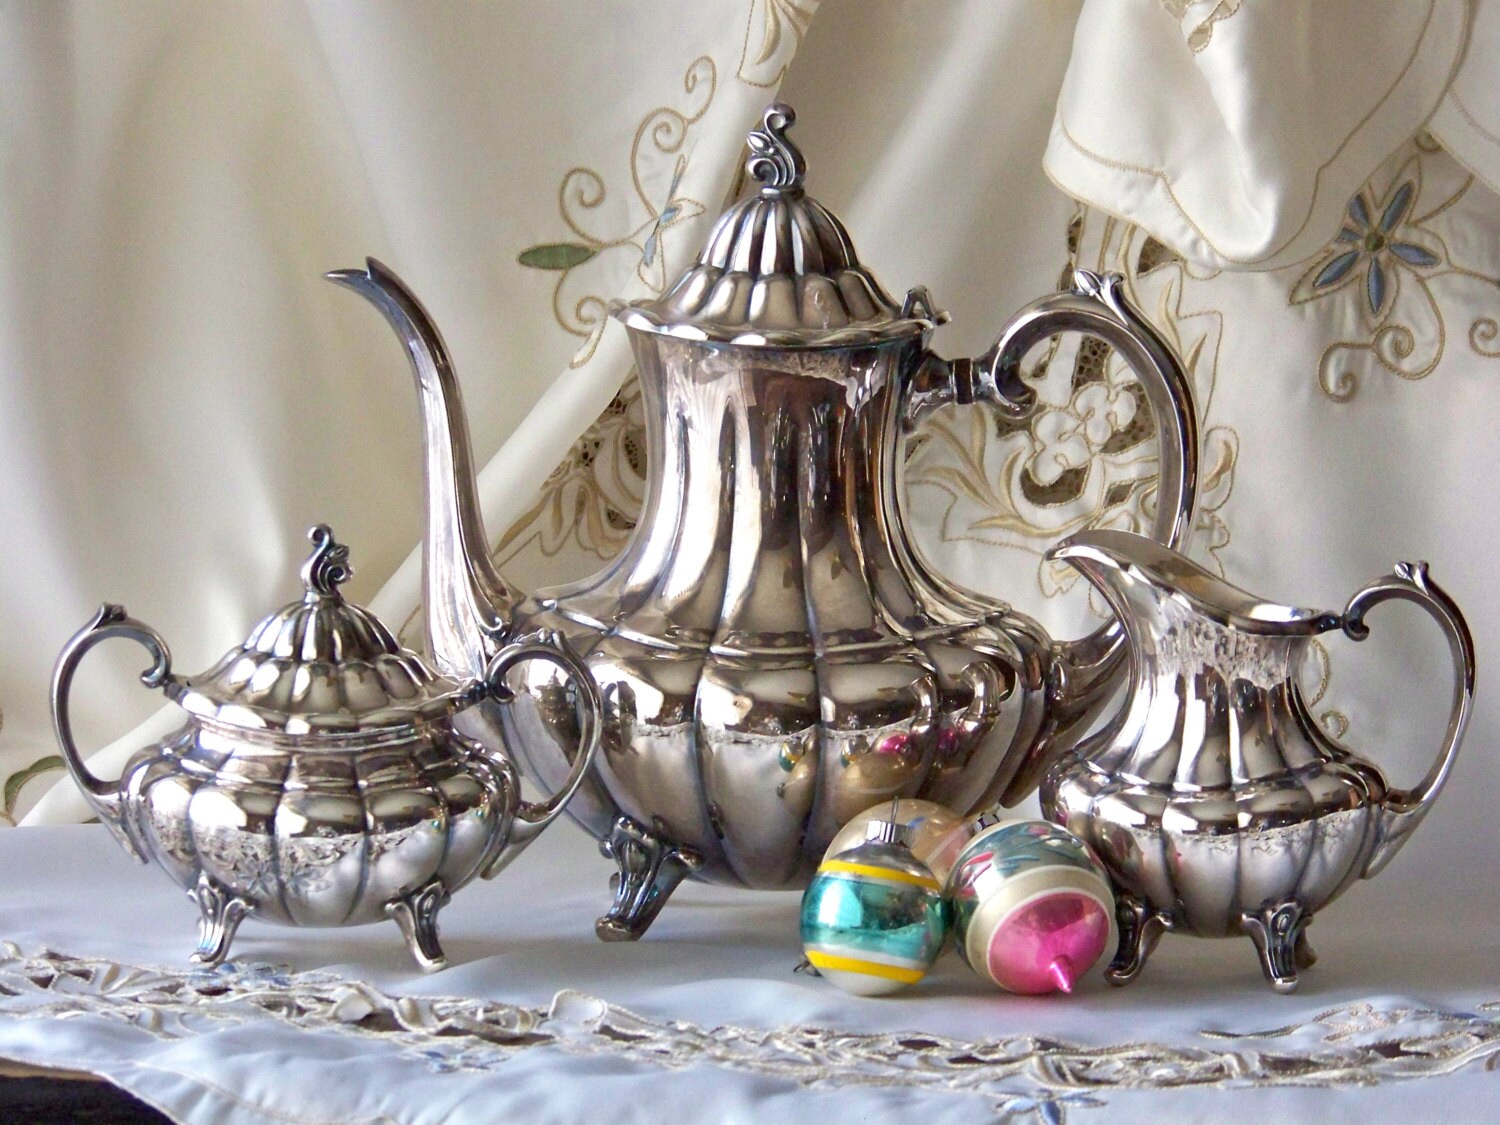 What is a good price for a silver-plated tea set?